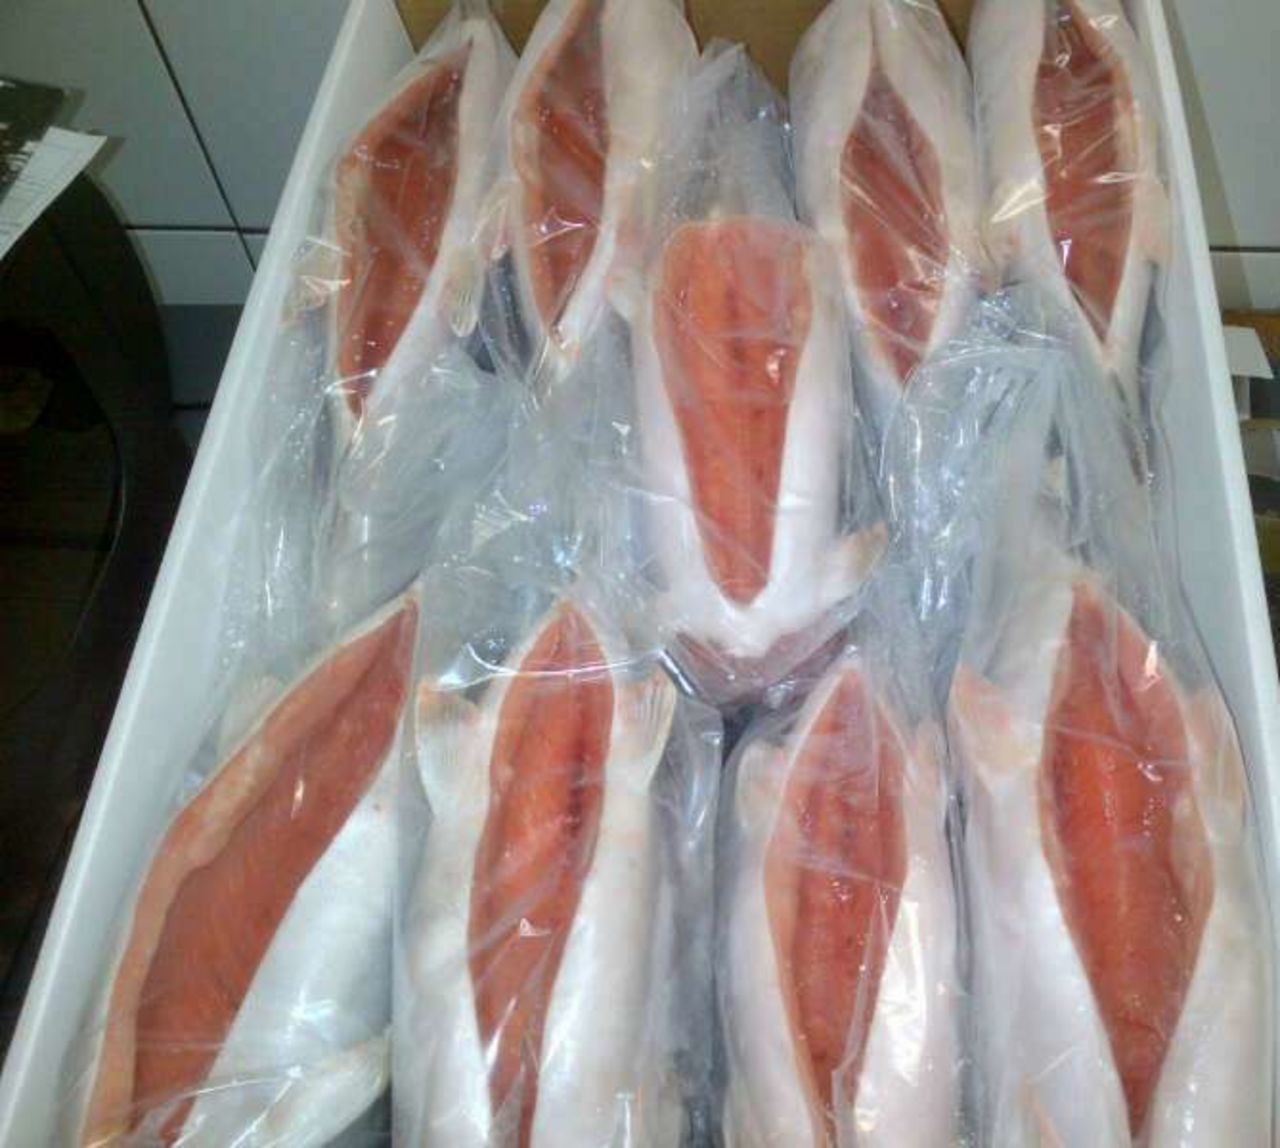 The final product, packed and ready to be sent to the South African port of Durban where the product will be loaded onto refridgerated ships. The trout then make a four week journey across to Asia.